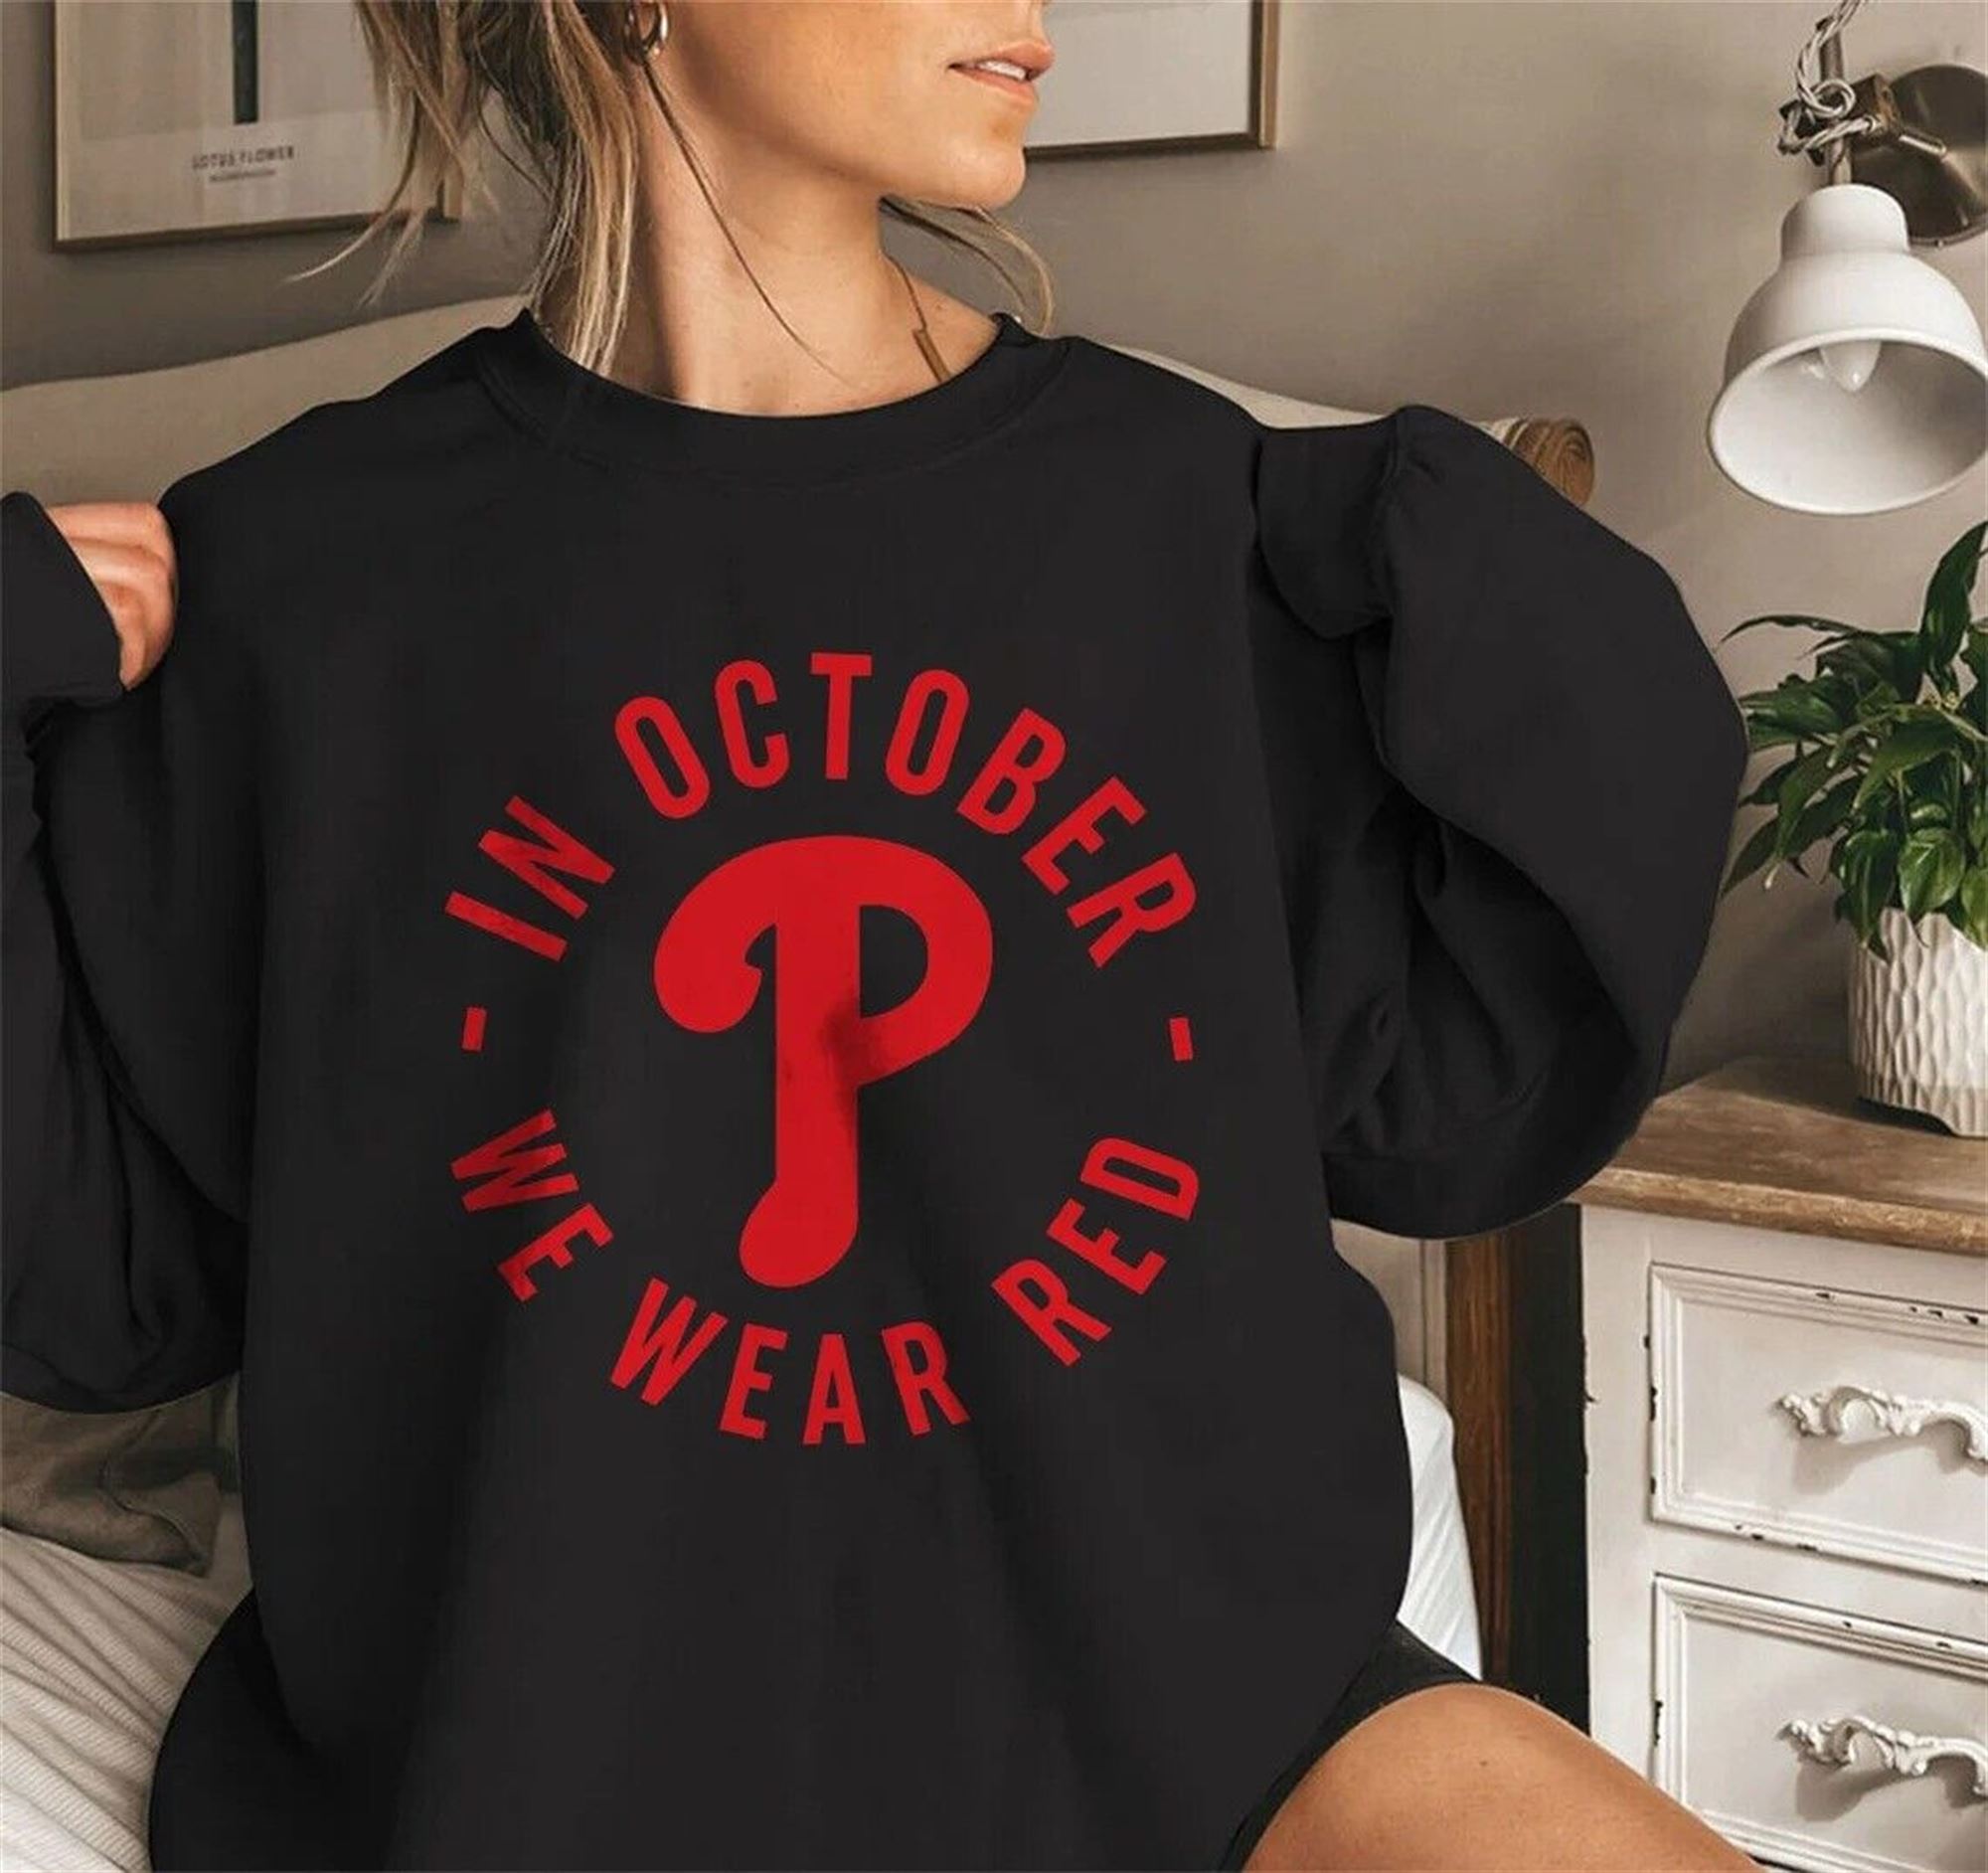 Philadelphia Phillies In October We Wear Red Sweatshirt Gift Wome Full Size Up To 5xl